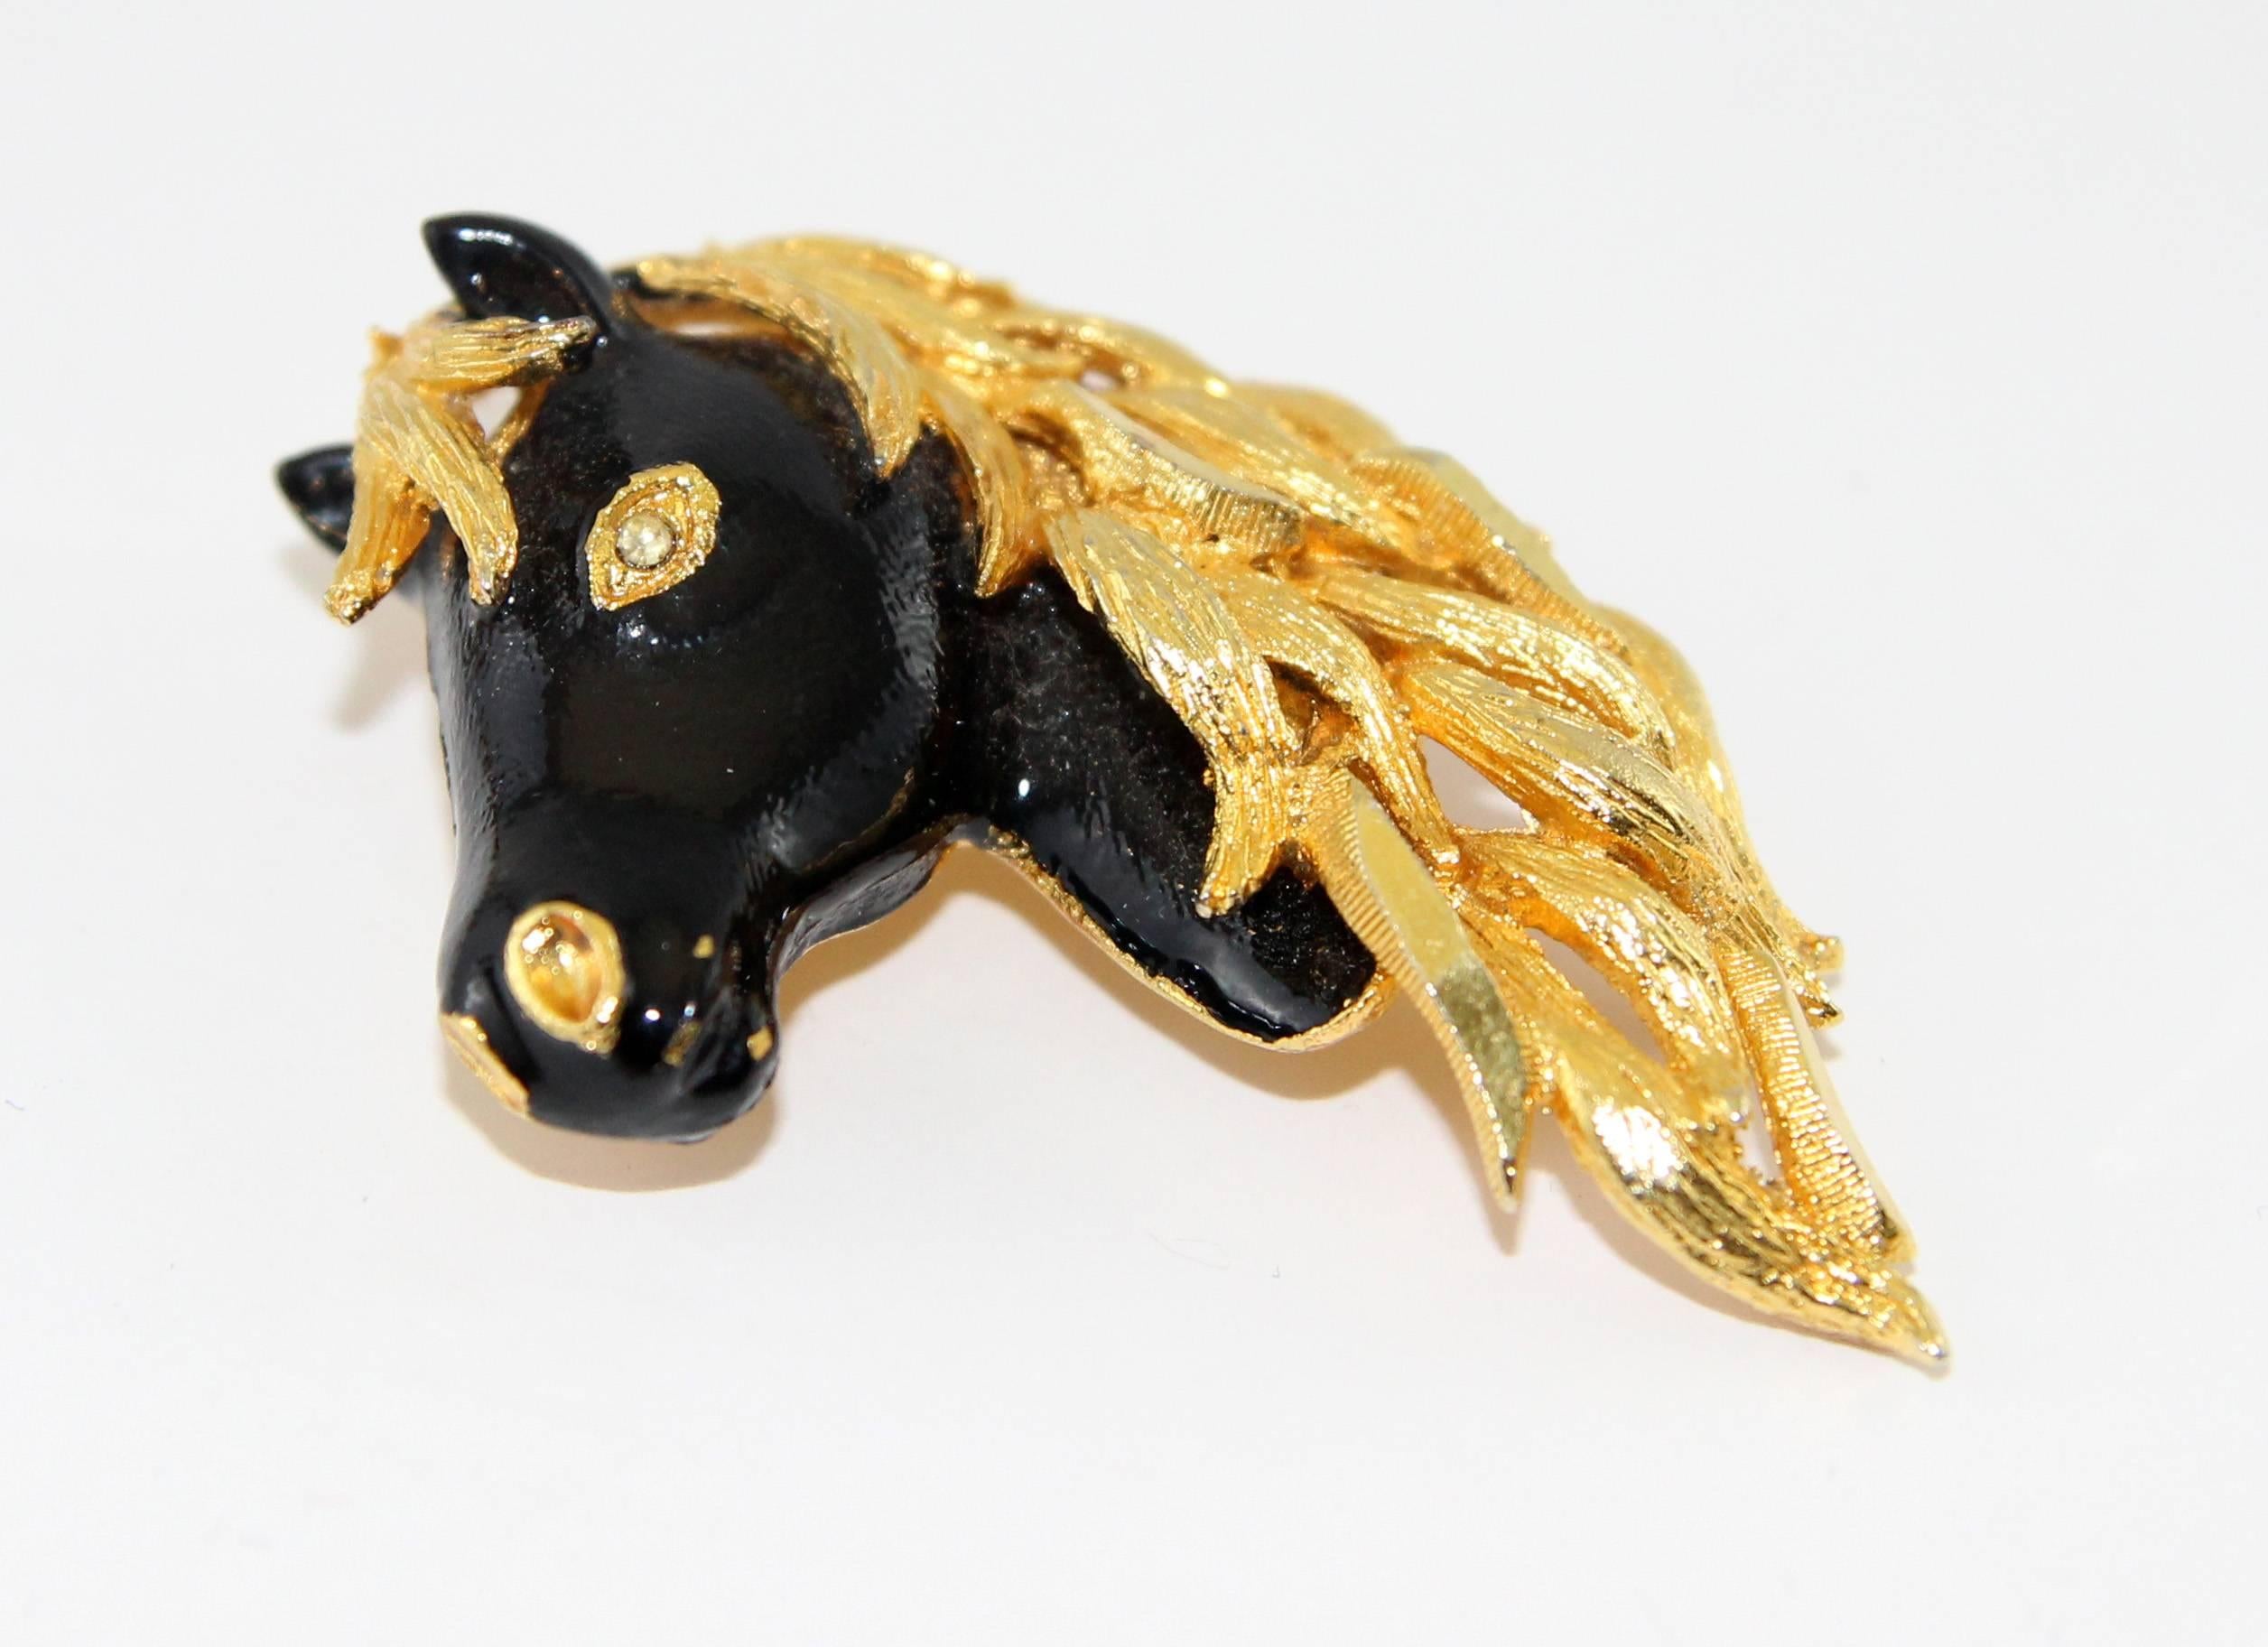 Made of black enamel, crystal stone and gold plated metal. 

Size: 5.5 x 3.5 cm

Excellent vintage condition